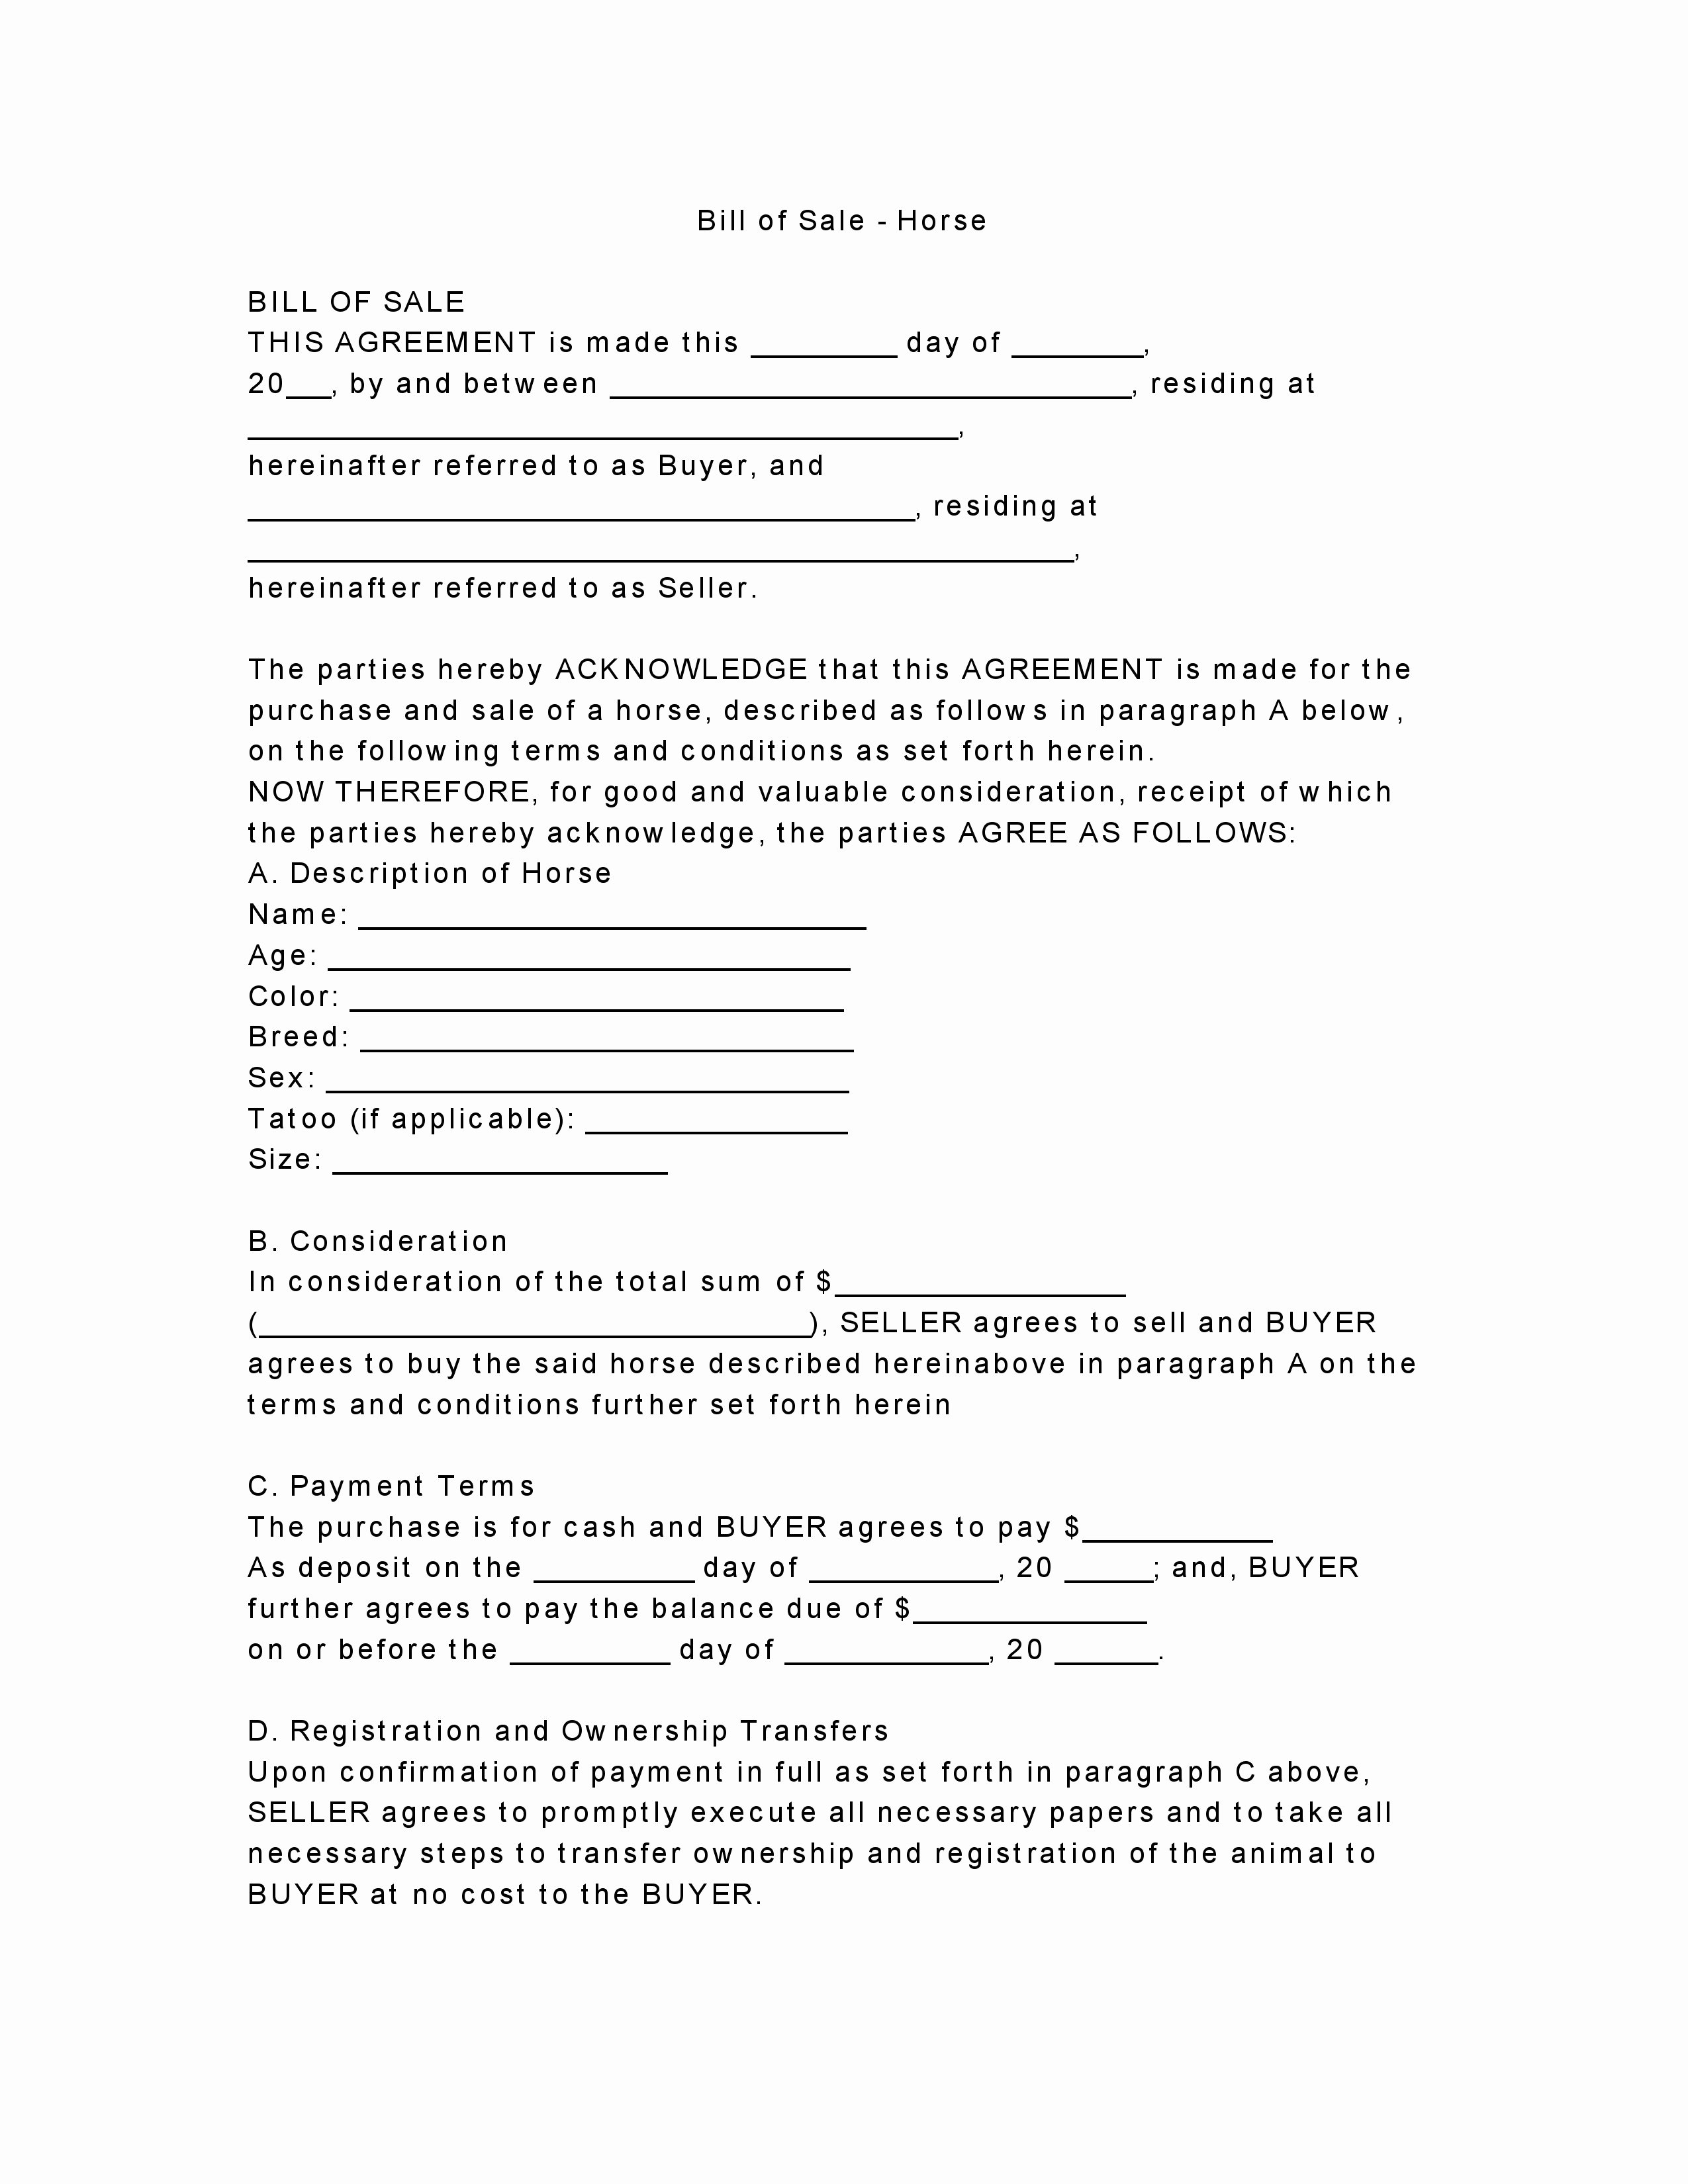 Bill Of Sale for Horse New Free Horse Bill Of Sale Pdf